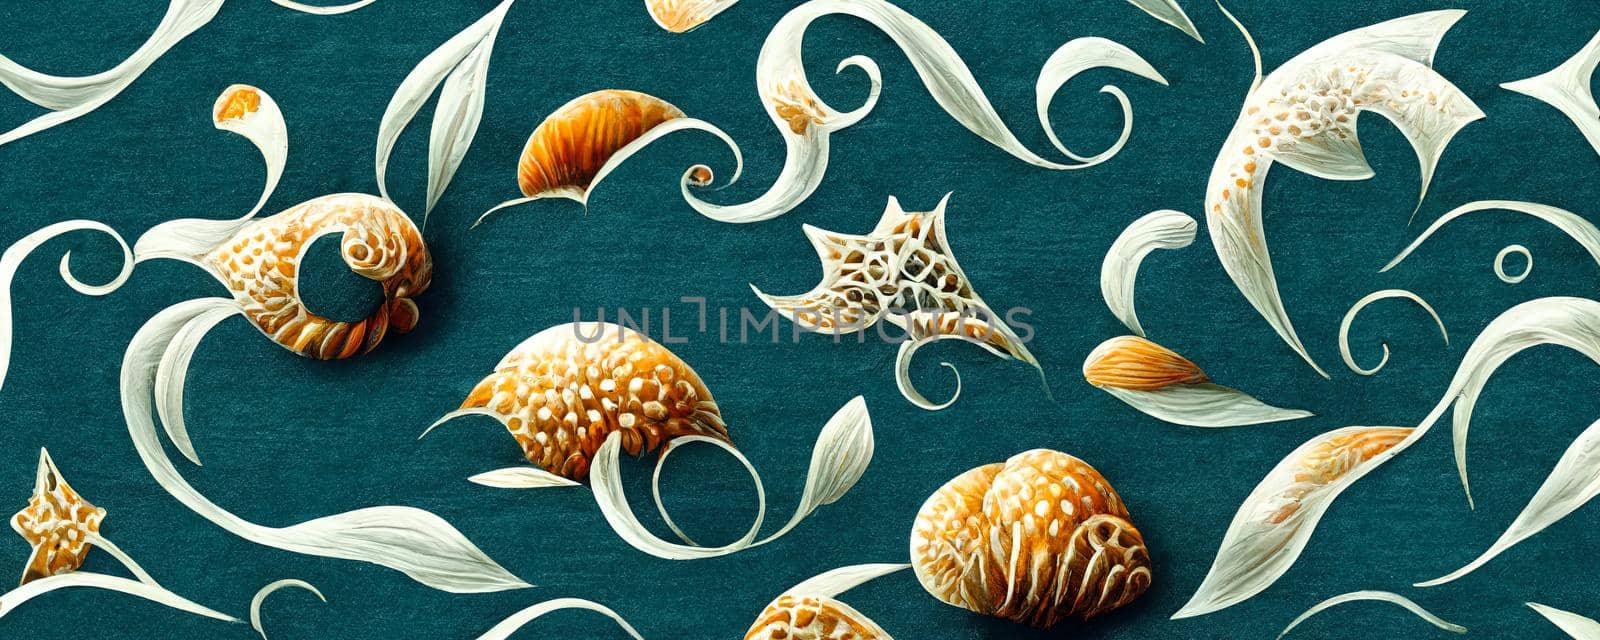 drawing on fabric on a marine theme with shells and waves.